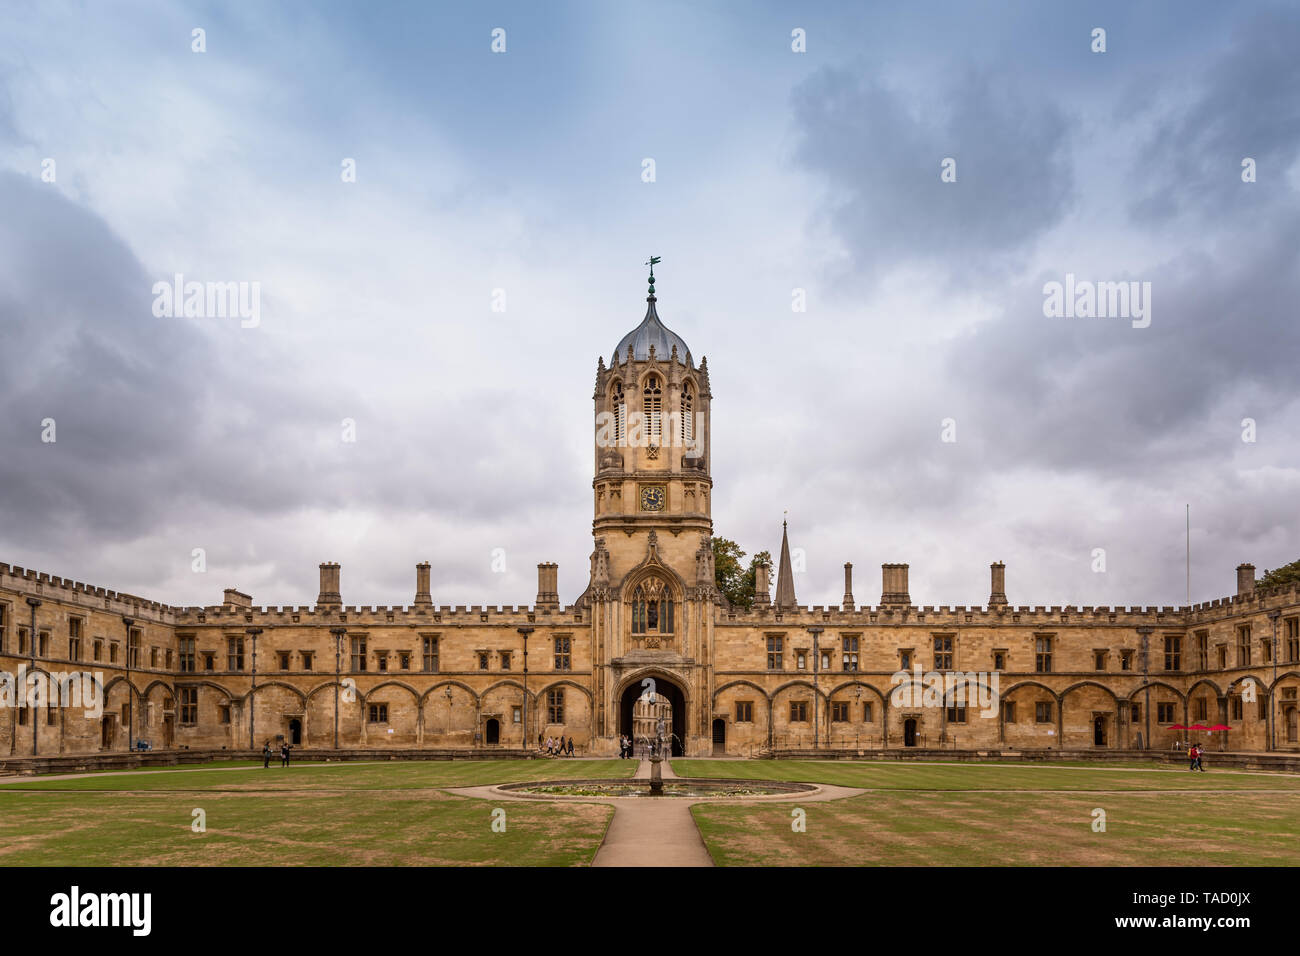 Tom Tower, Christ Church, Oxford University, UK Banque D'Images